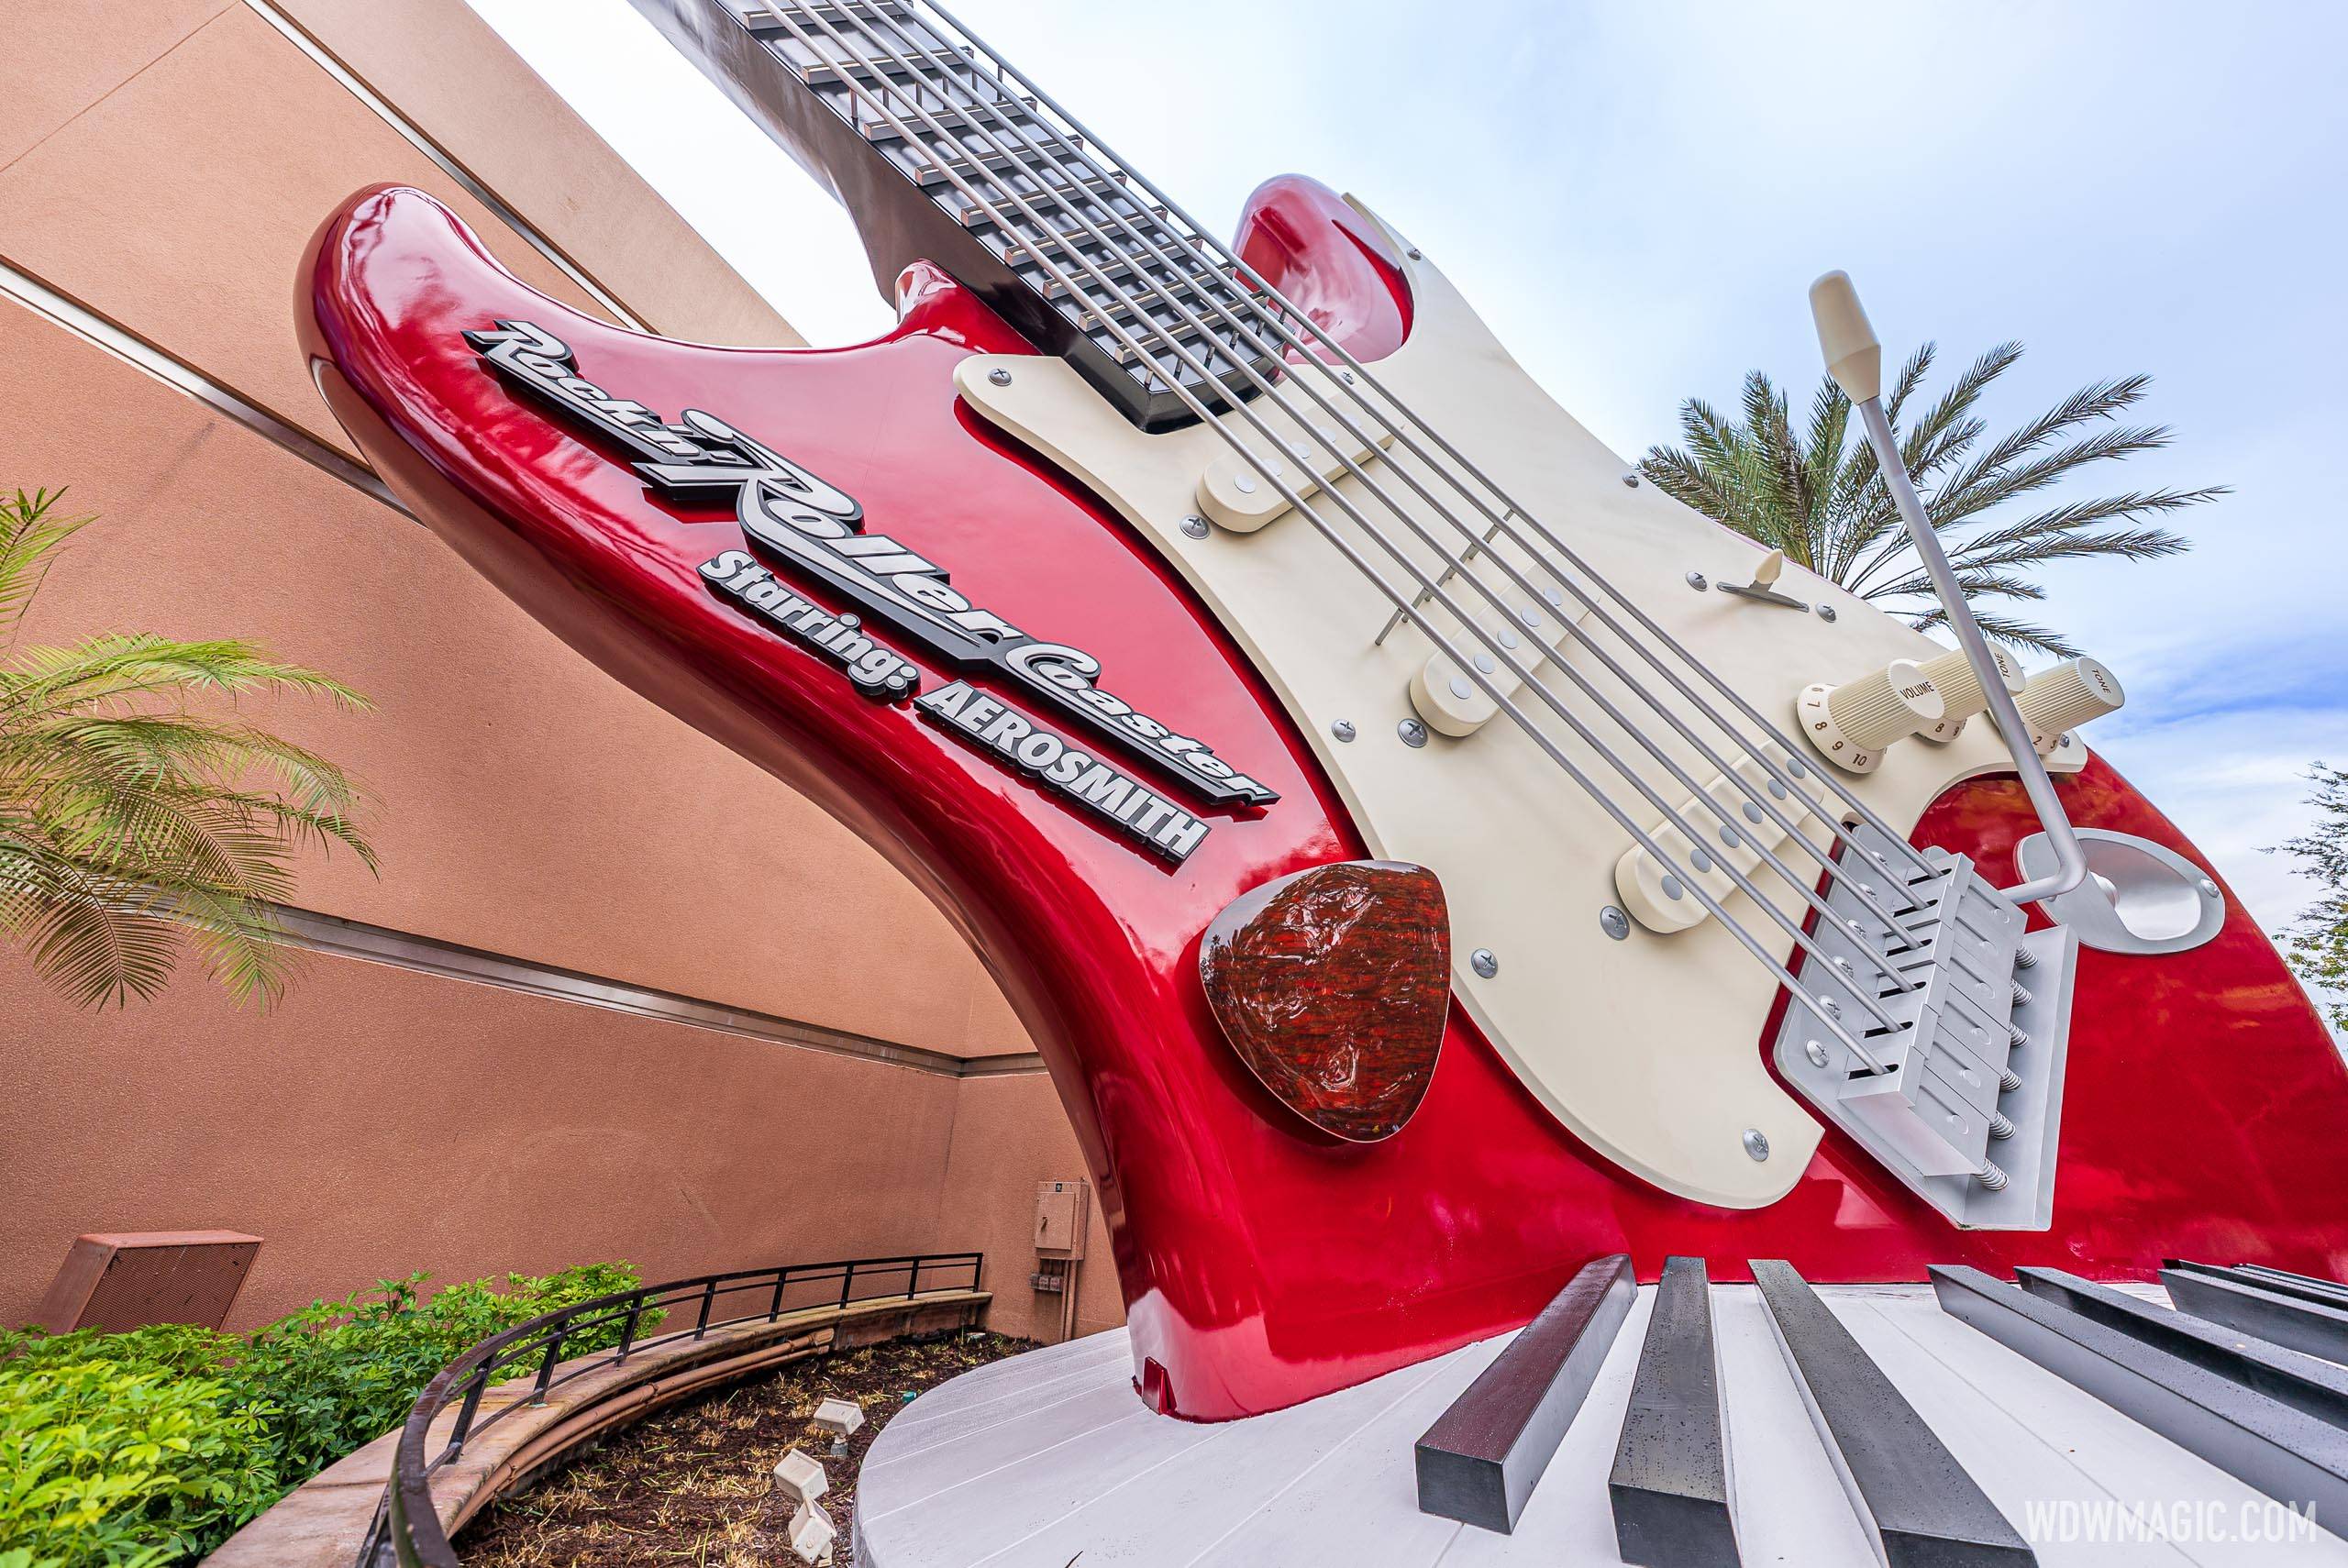 Rock 'n' RollerCoaster's 40ft tall Stratocaster restored in recent refurbishment